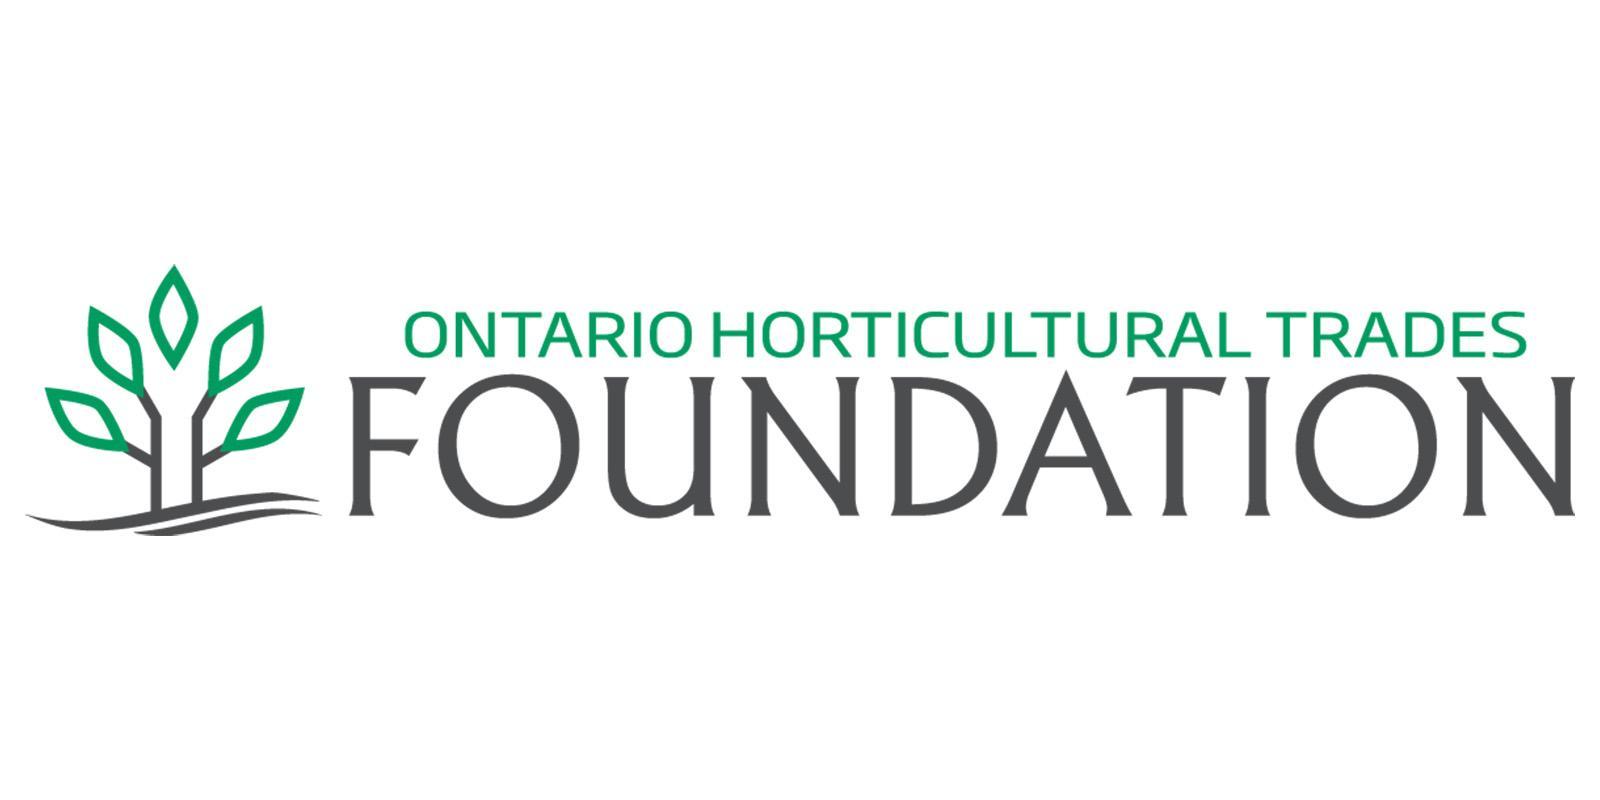 Ontario Horticultural Trades Foundation collaborates with Vineland on innovation team aiming to expand berry production in Canada